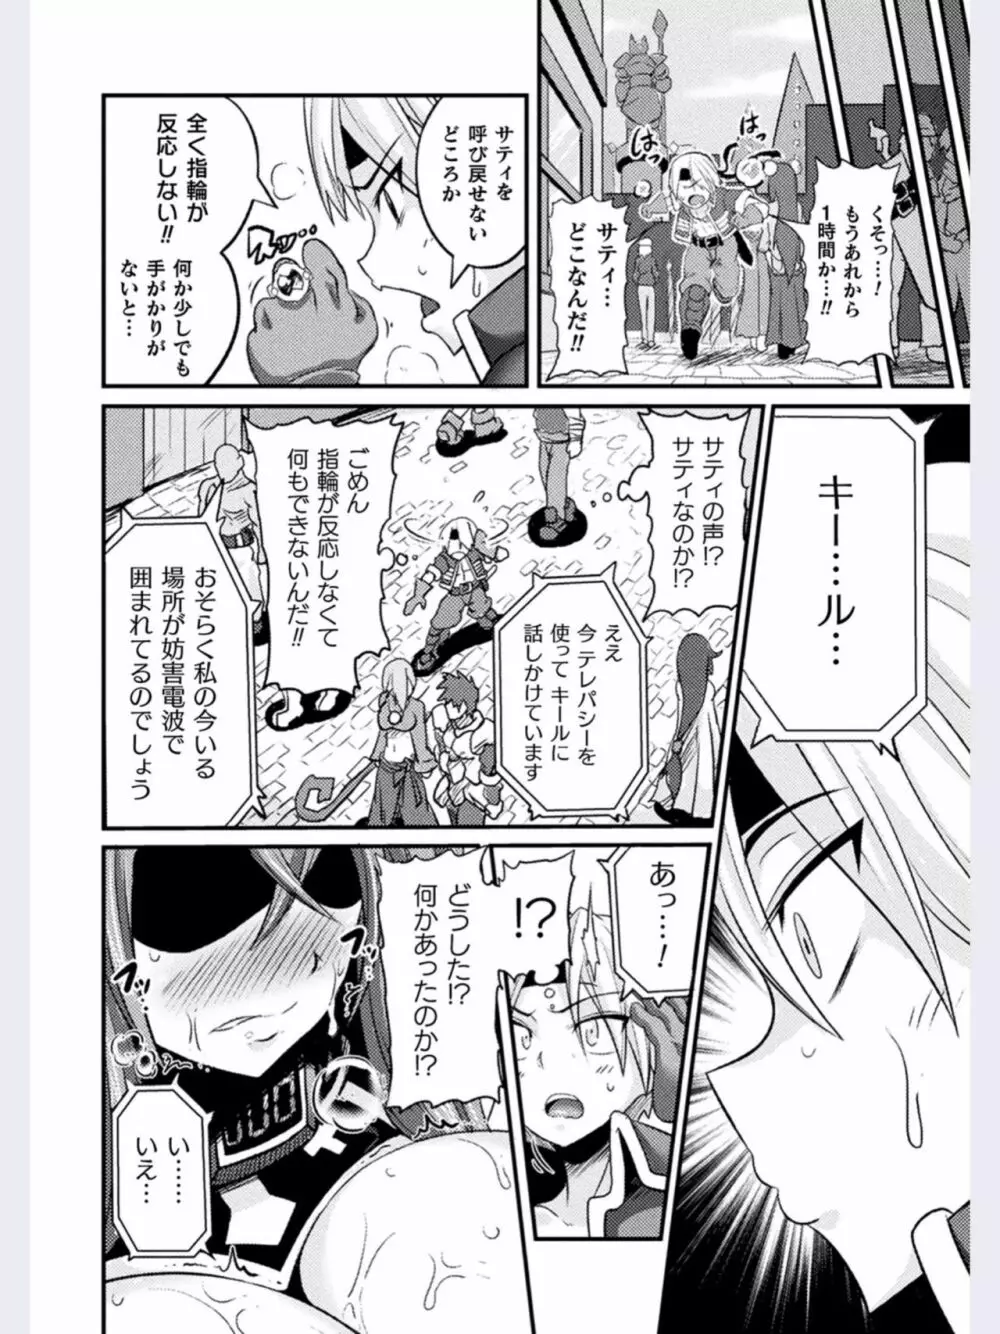 LOVE METER〜寝取られた相棒〜 #1 Page.6